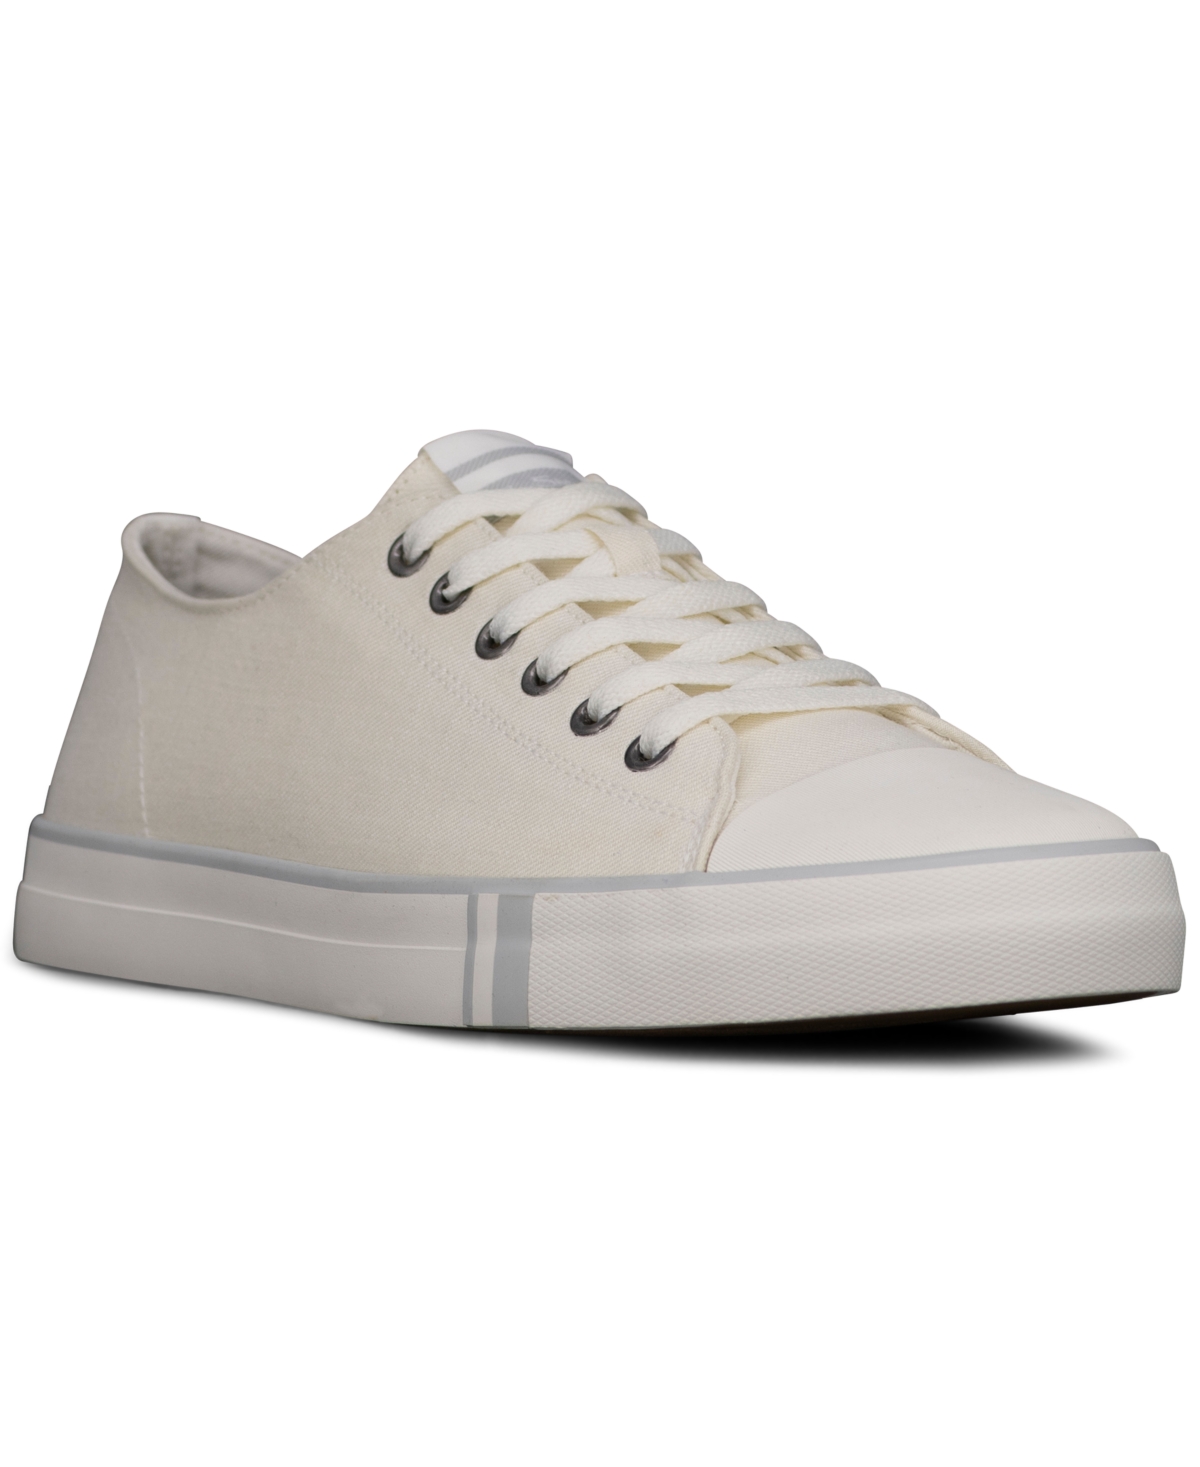 Men's Hadley Low Canvas Casual Sneakers from Finish Line - White/Grey